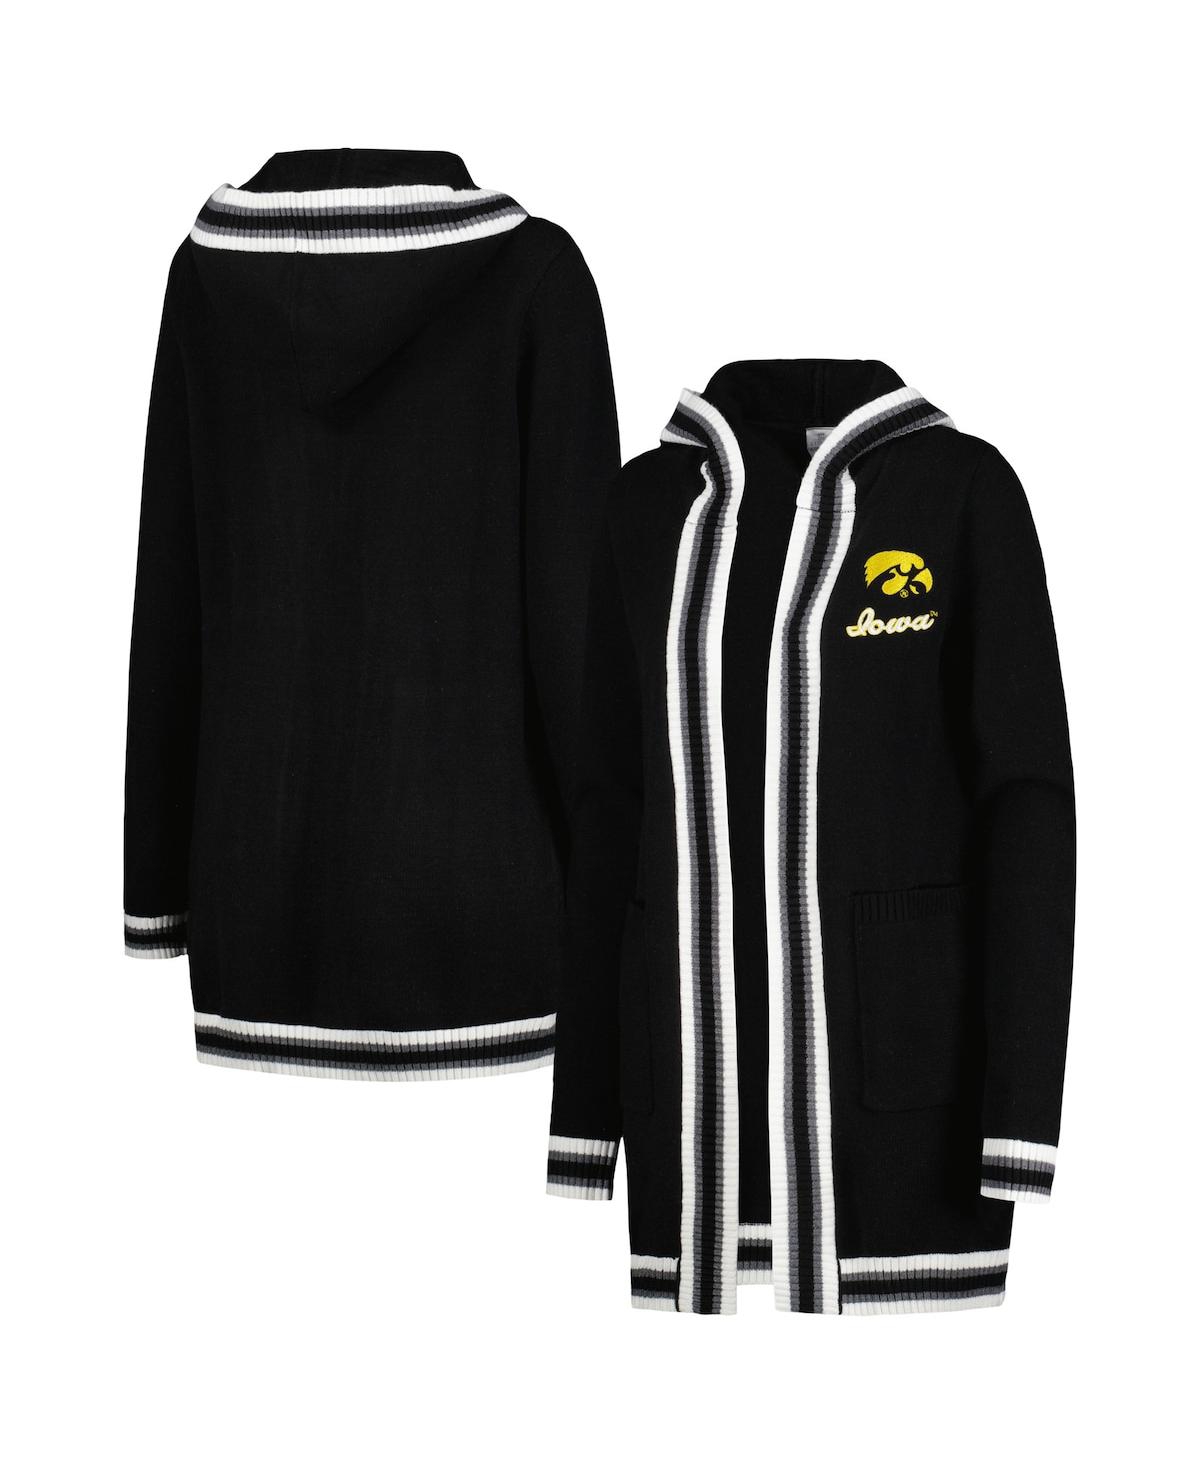 GAMEDAY COUTURE WOMEN'S GAMEDAY COUTURE BLACK IOWA HAWKEYES ONE MORE ROUND TRI-BLEND STRIPED HOODED CARDIGAN SWEATER